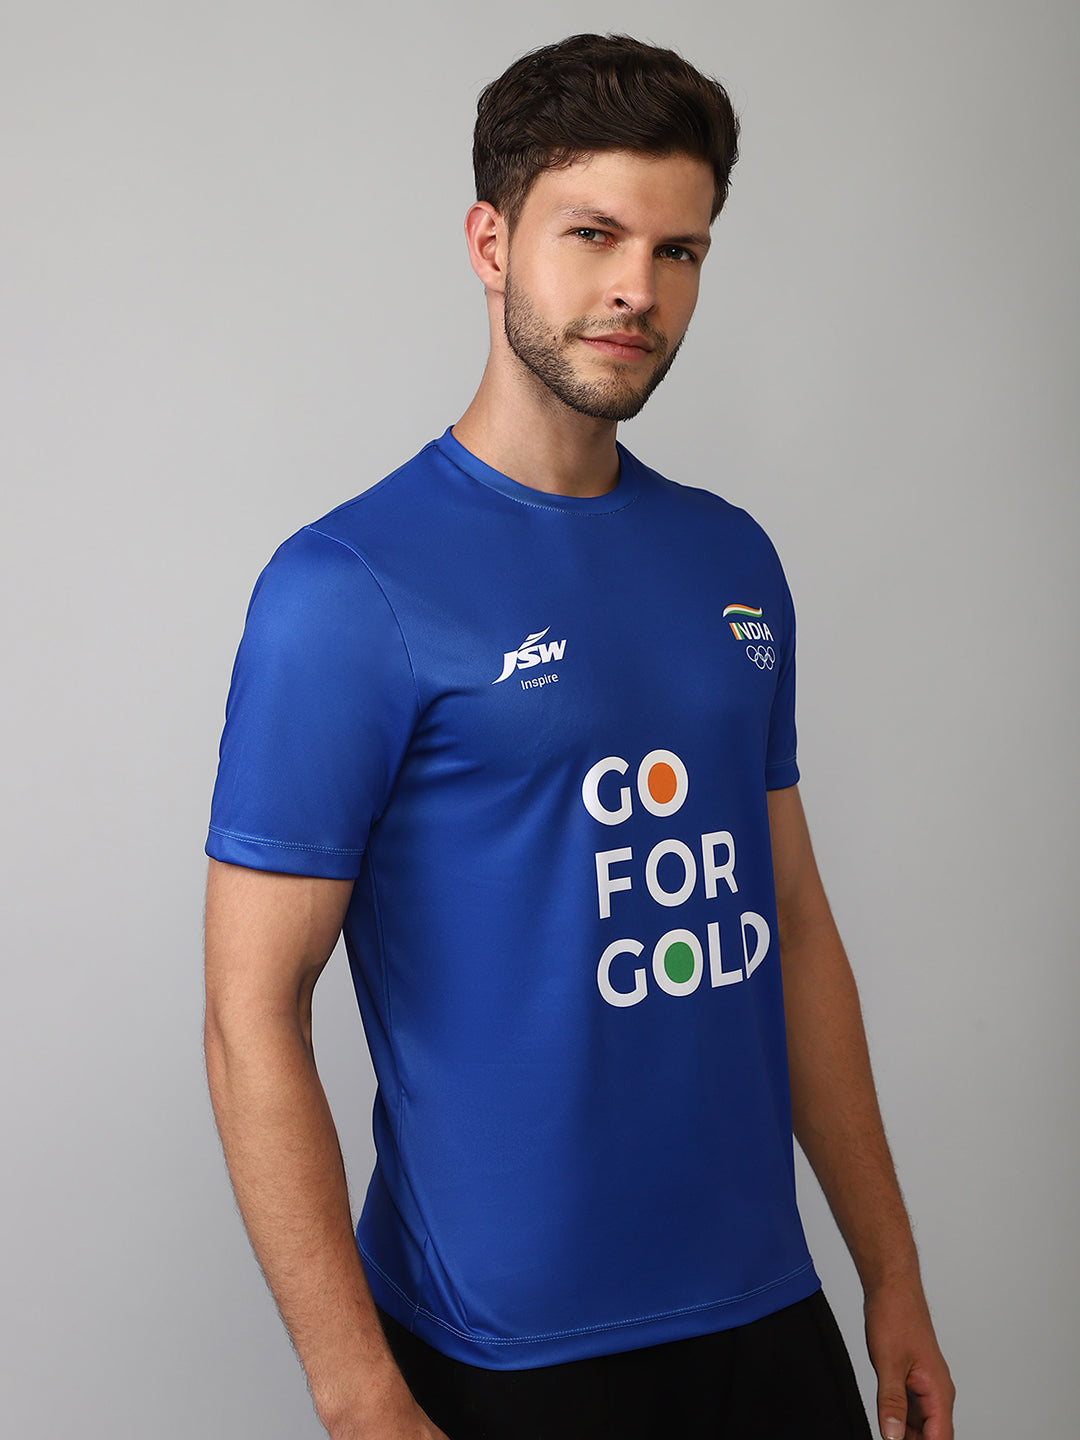 InspireGo For Gold Fan Tee - Navy Blue